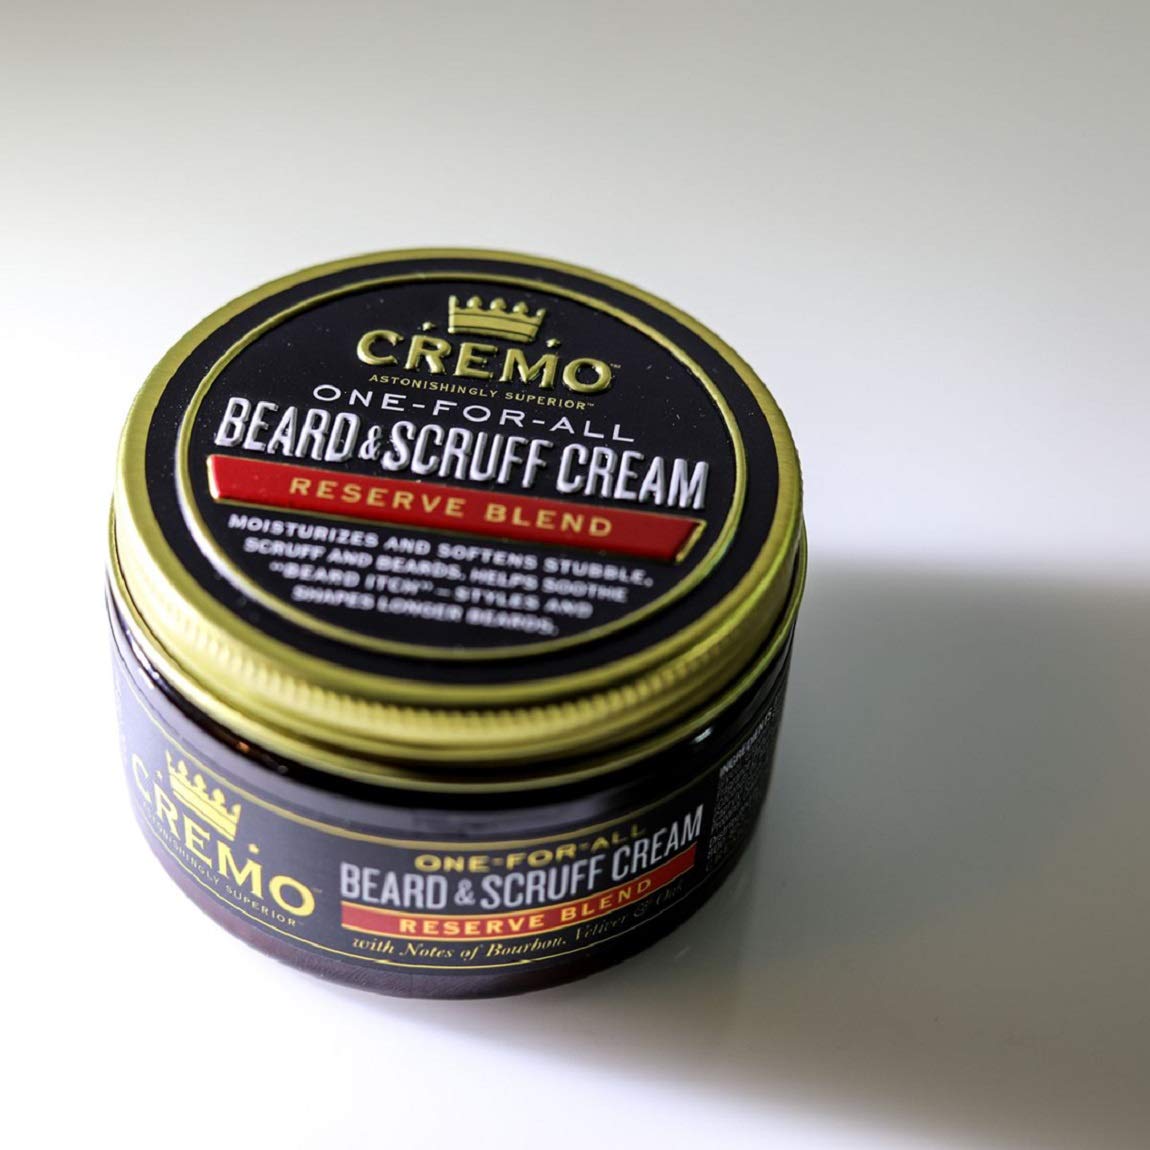 Cremo Beard & Scruff Cream, Distiller's Blend (Reserve Collection), 4 oz - Soothe Beard Itch, Condition and Offer Light-Hold Styling for Stubble and Scruff (Product Packaging May Vary) 0 fluid ounces